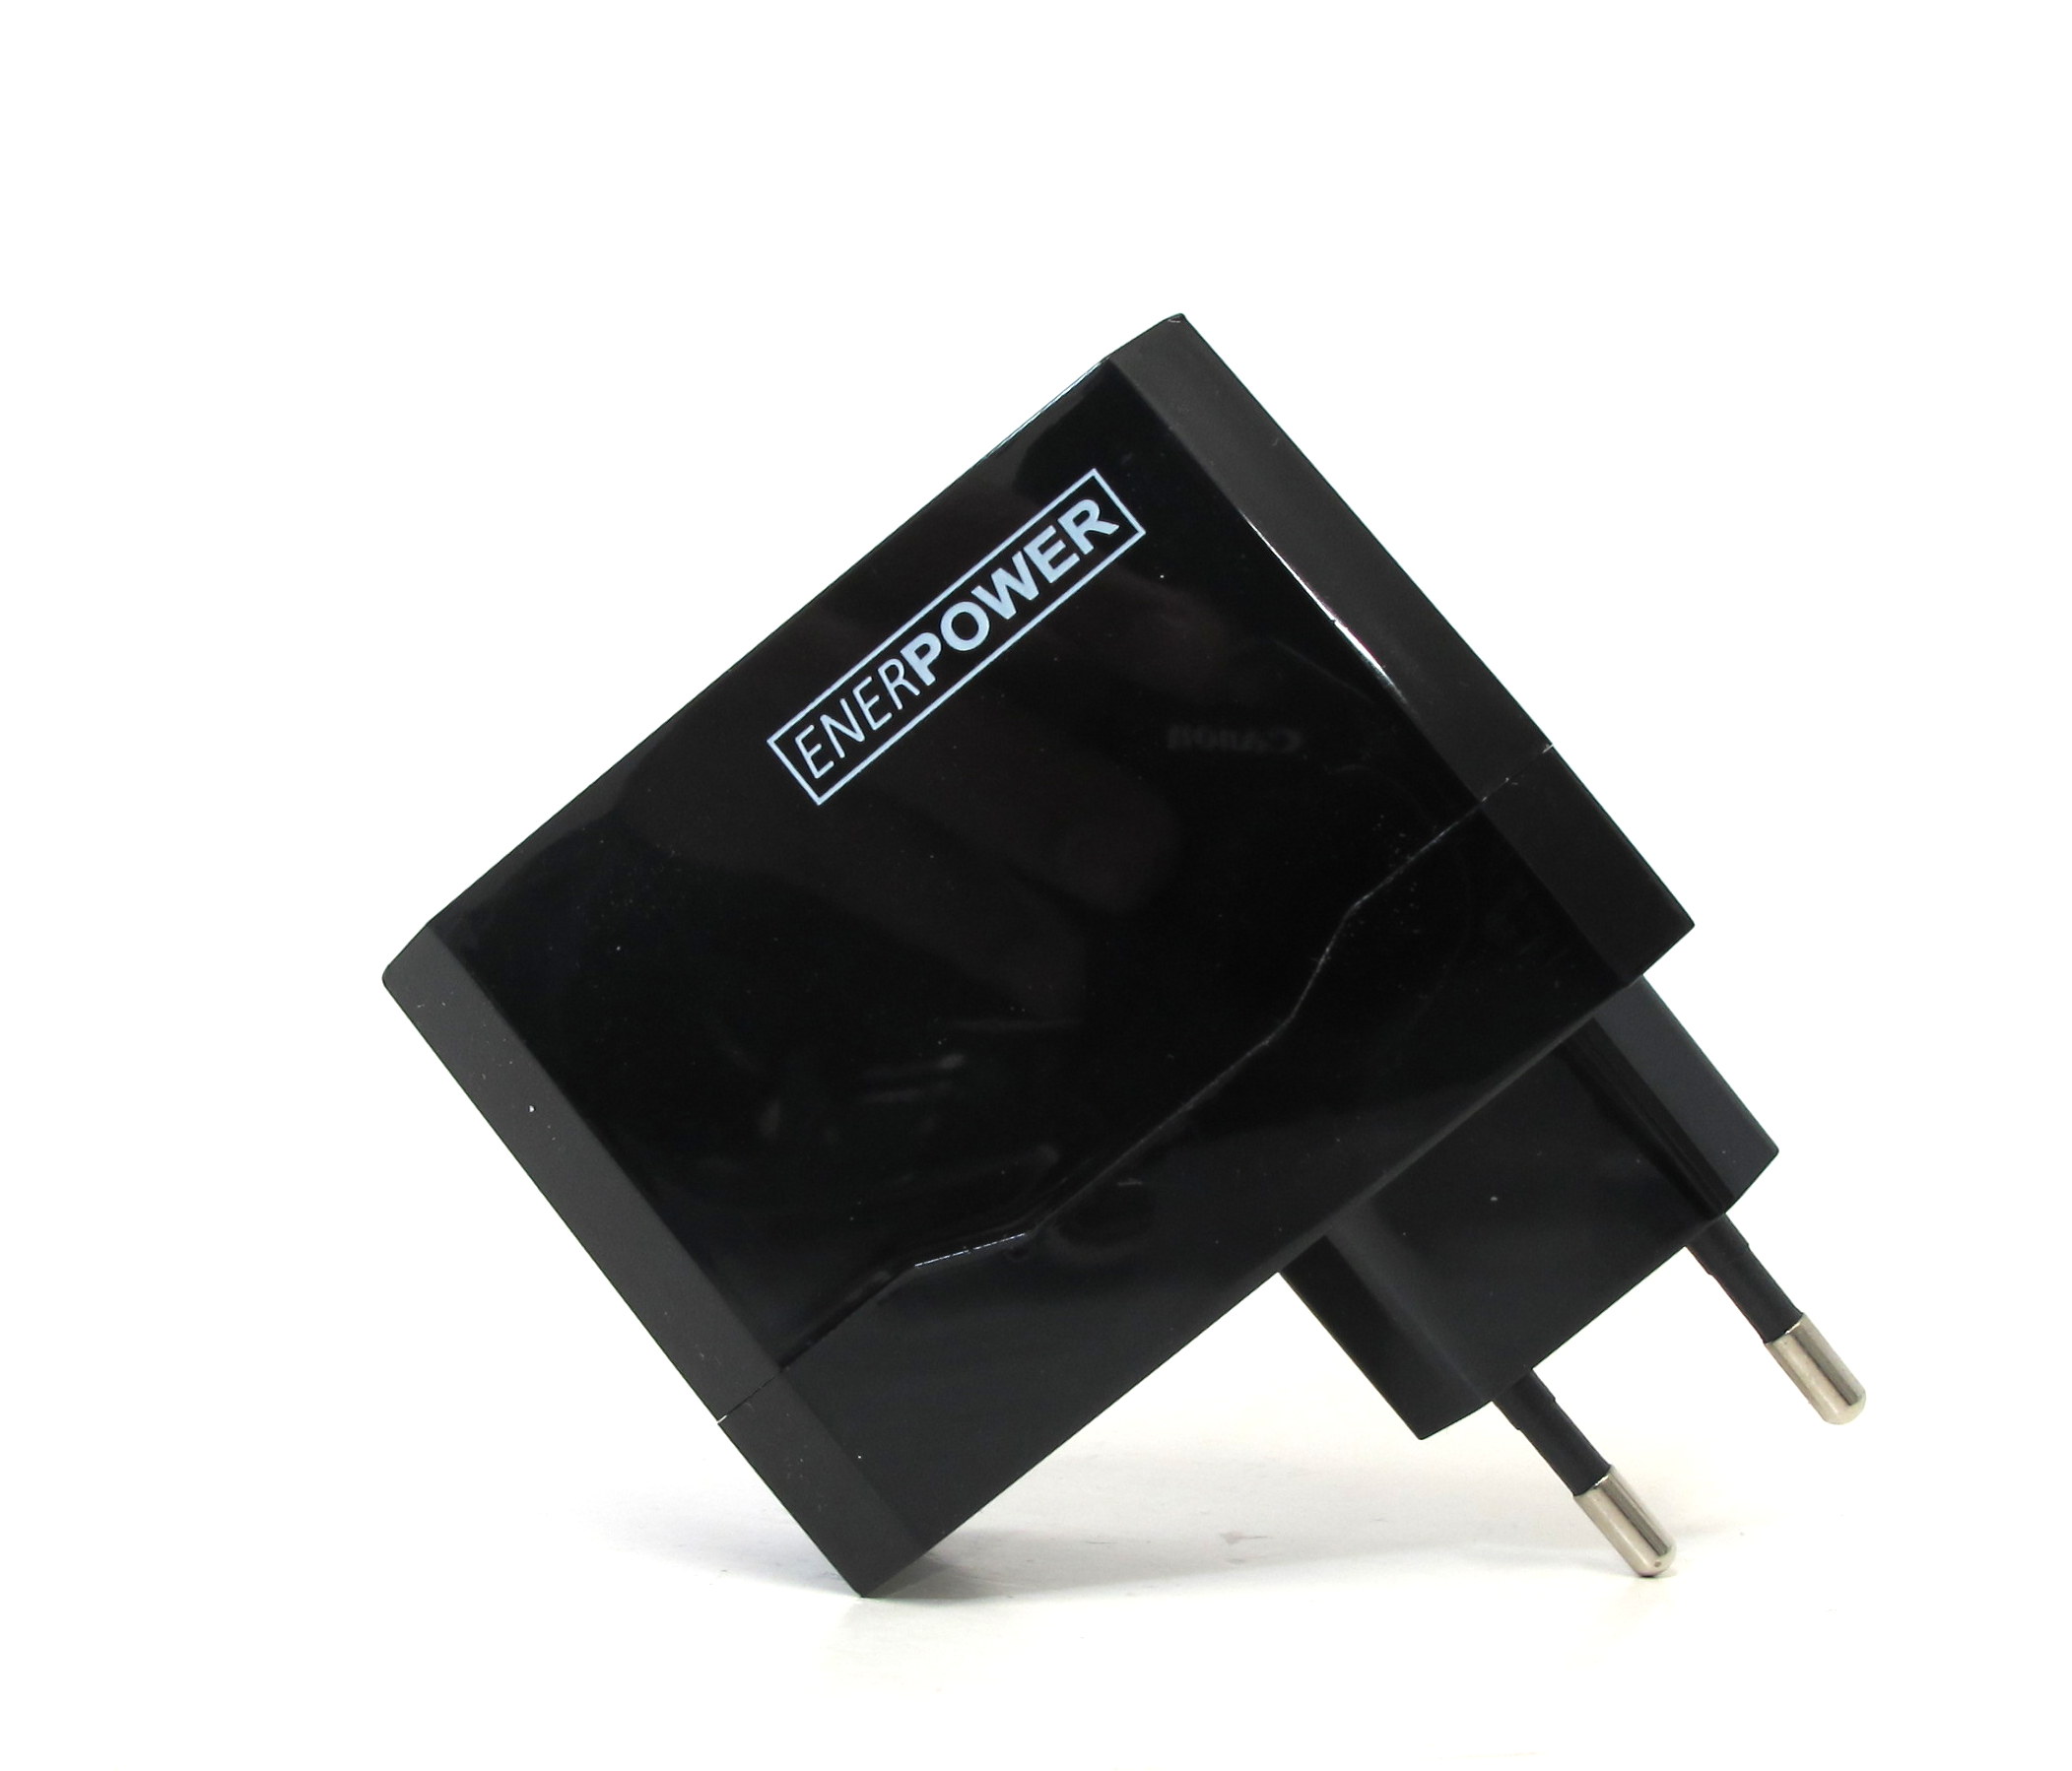 ENERpower EP-L12 Universal Dual 5V Power Supply USB Charger (2.4A / 1A)